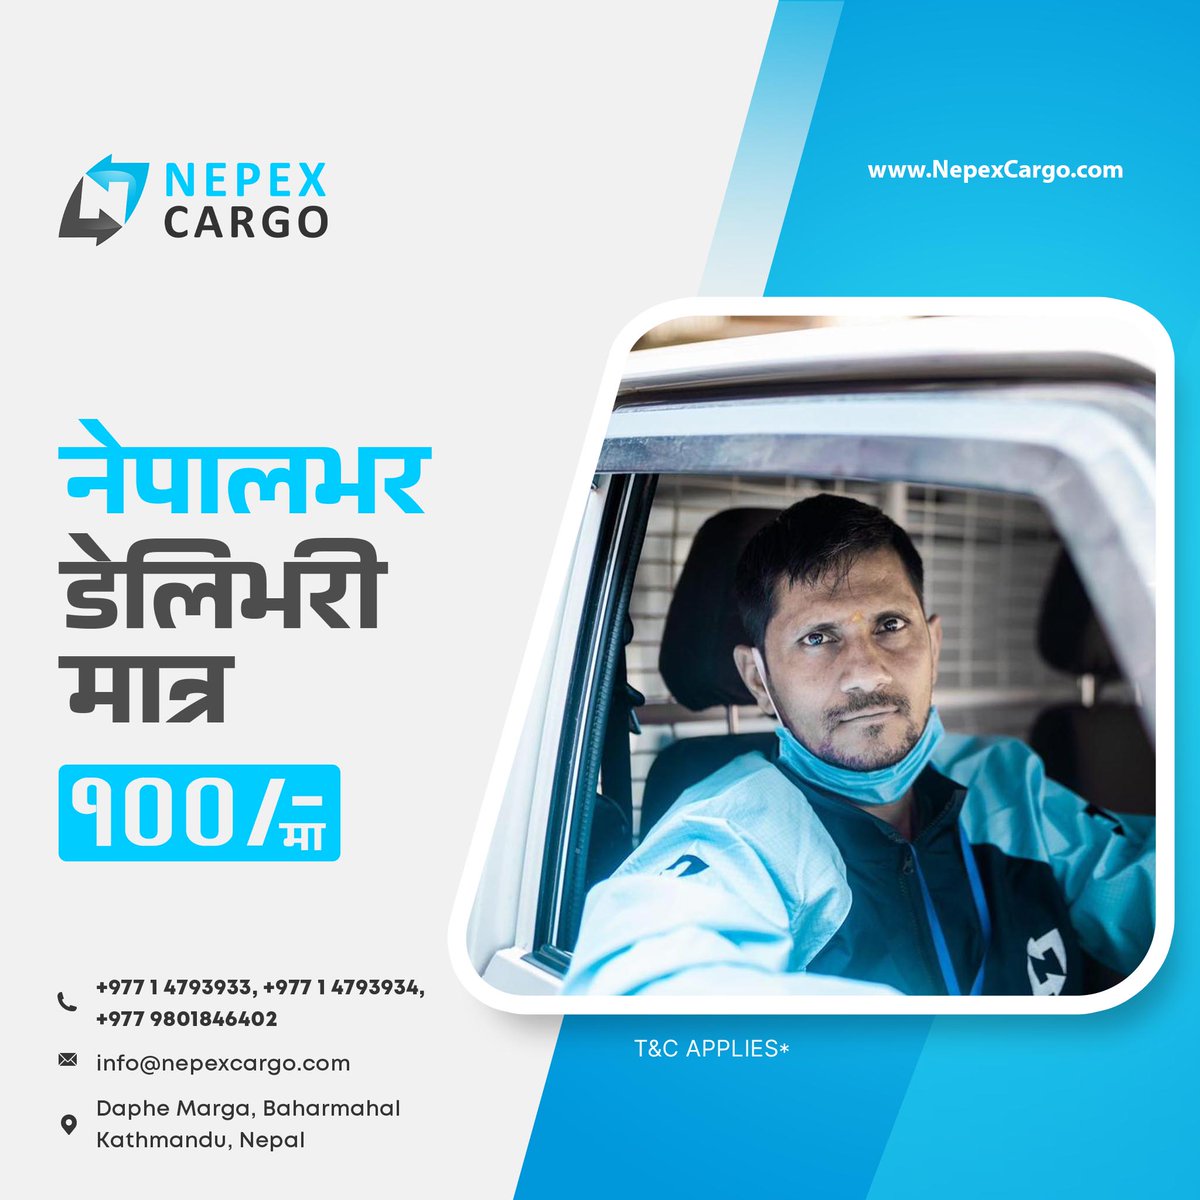 📷 Simplify your business with Nepex Cargo!
Get nationwide delivery across Nepal for just 100 rupees per delivery. #NepexCargo #DeliveryService #NationwideDelivery #AffordableRates
For Bookings, NepexCargo.com
call: +97714793933 | +97714793934
whatsapp: +9779801846400